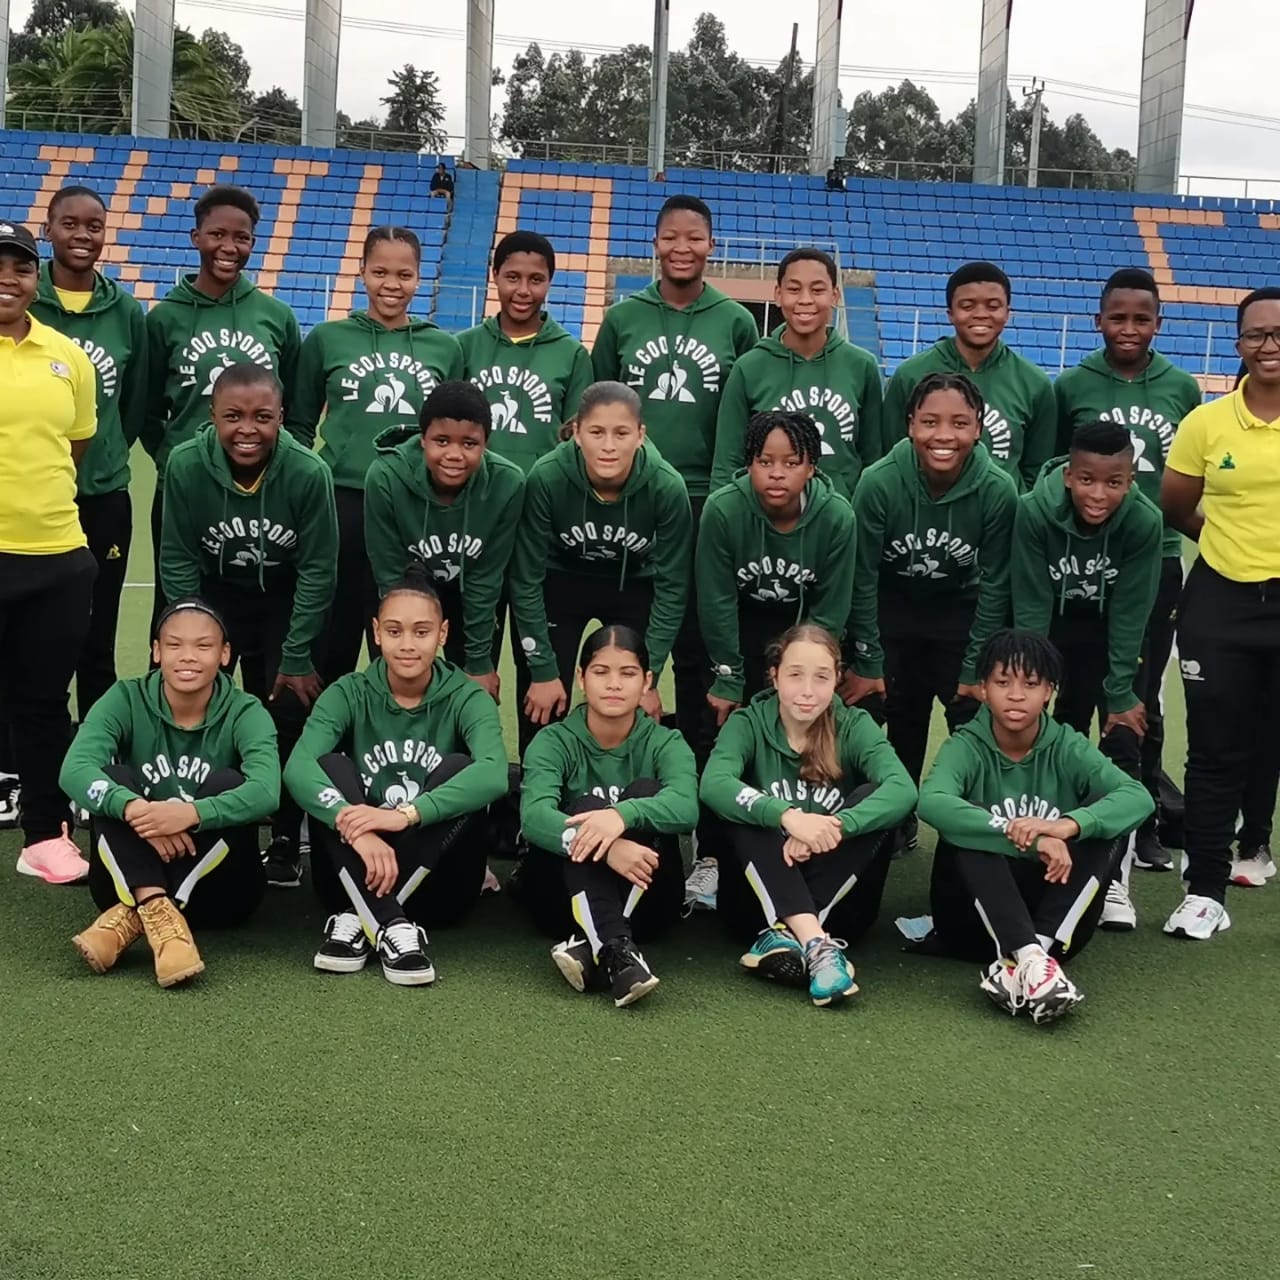 Congratulations to the South African under-17 Women’s National Football Team (Bantwana) who won 1-0 over the Ethiopian counterpart in a match that took place at Abebe Bikila Stadium in Addis Ababa on 01 May 2022.